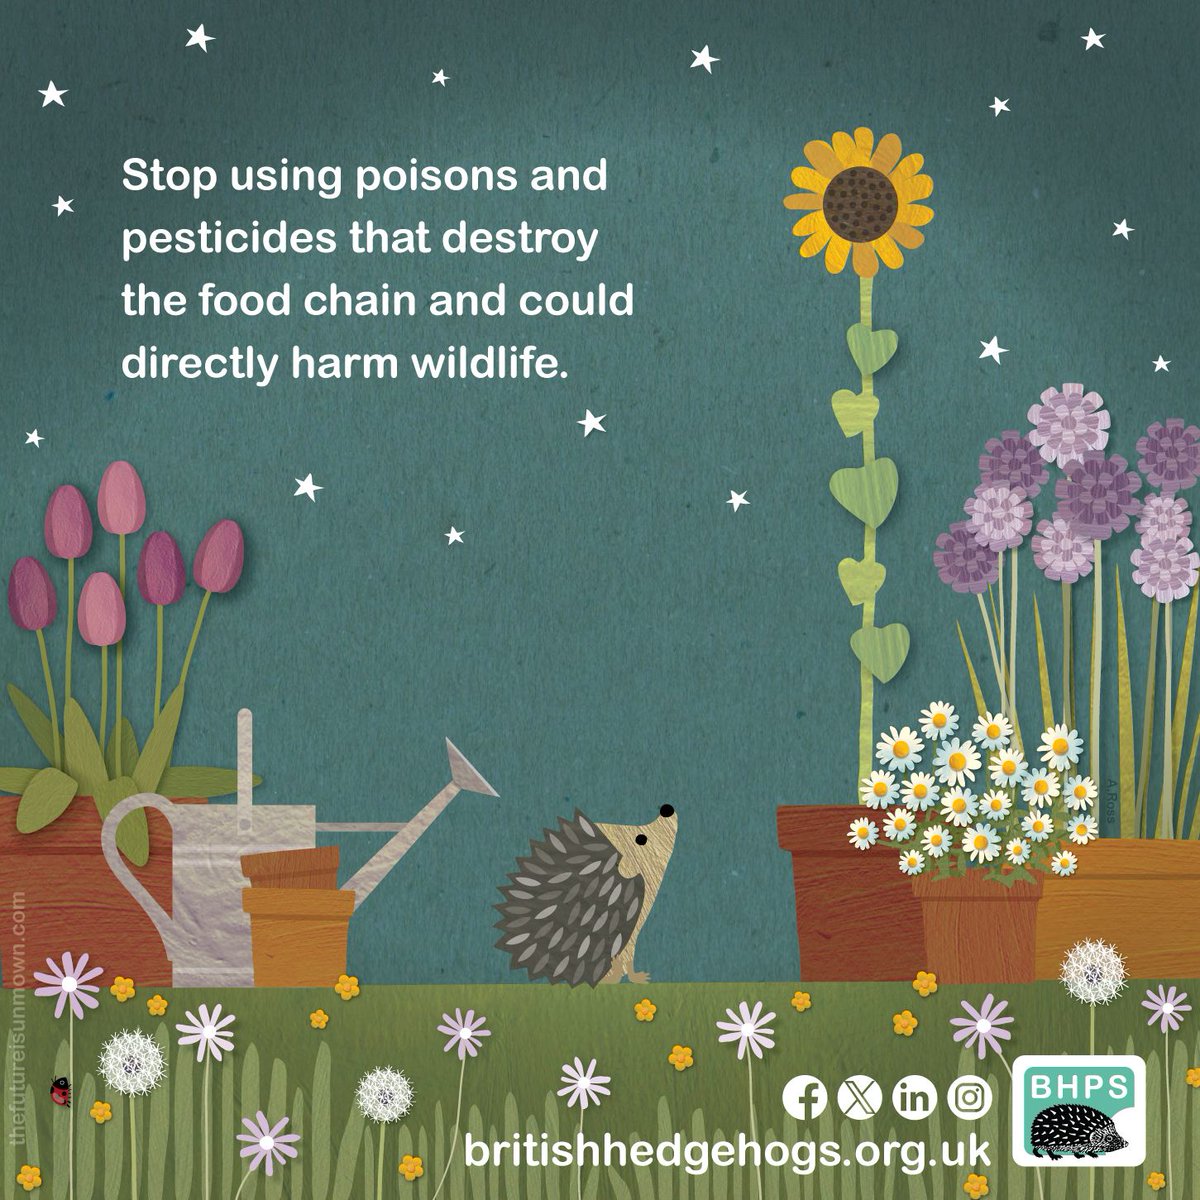 Going organic in the garden is one fantastic way to help hedgehogs out! 🌼 🦔 🪲 Ditch the pesticides & #WelcomeWildlife all year long! Thanks to @TFIUnmown for donating this infographic. Help spread the word during #HedgehogWeek & #ShareToMakeAware